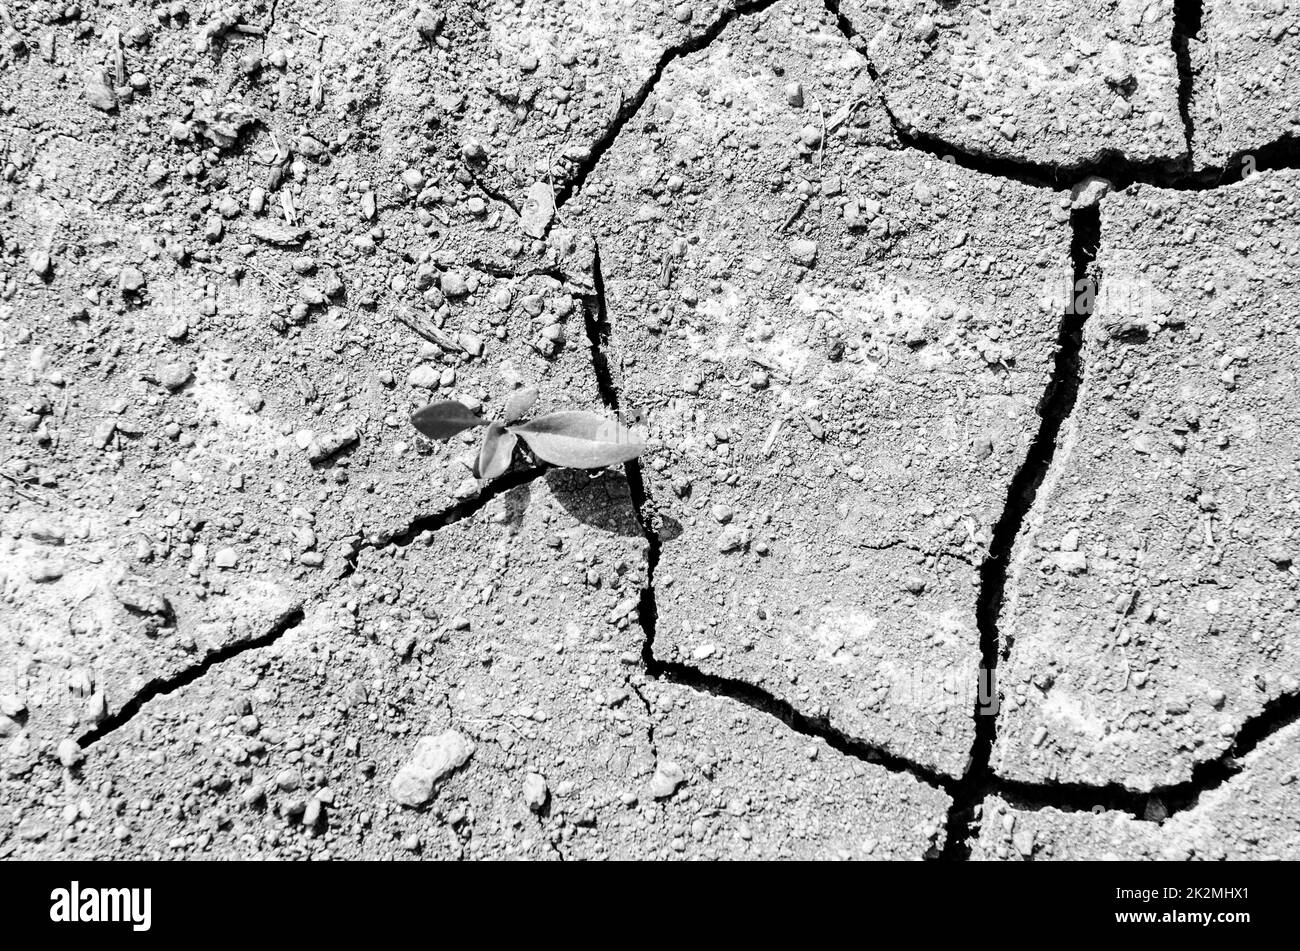 Dry soil, cracked muddy ground, dried mud with cracks, flat lay view from directly above, natural abstract background or wallpaper Stock Photo